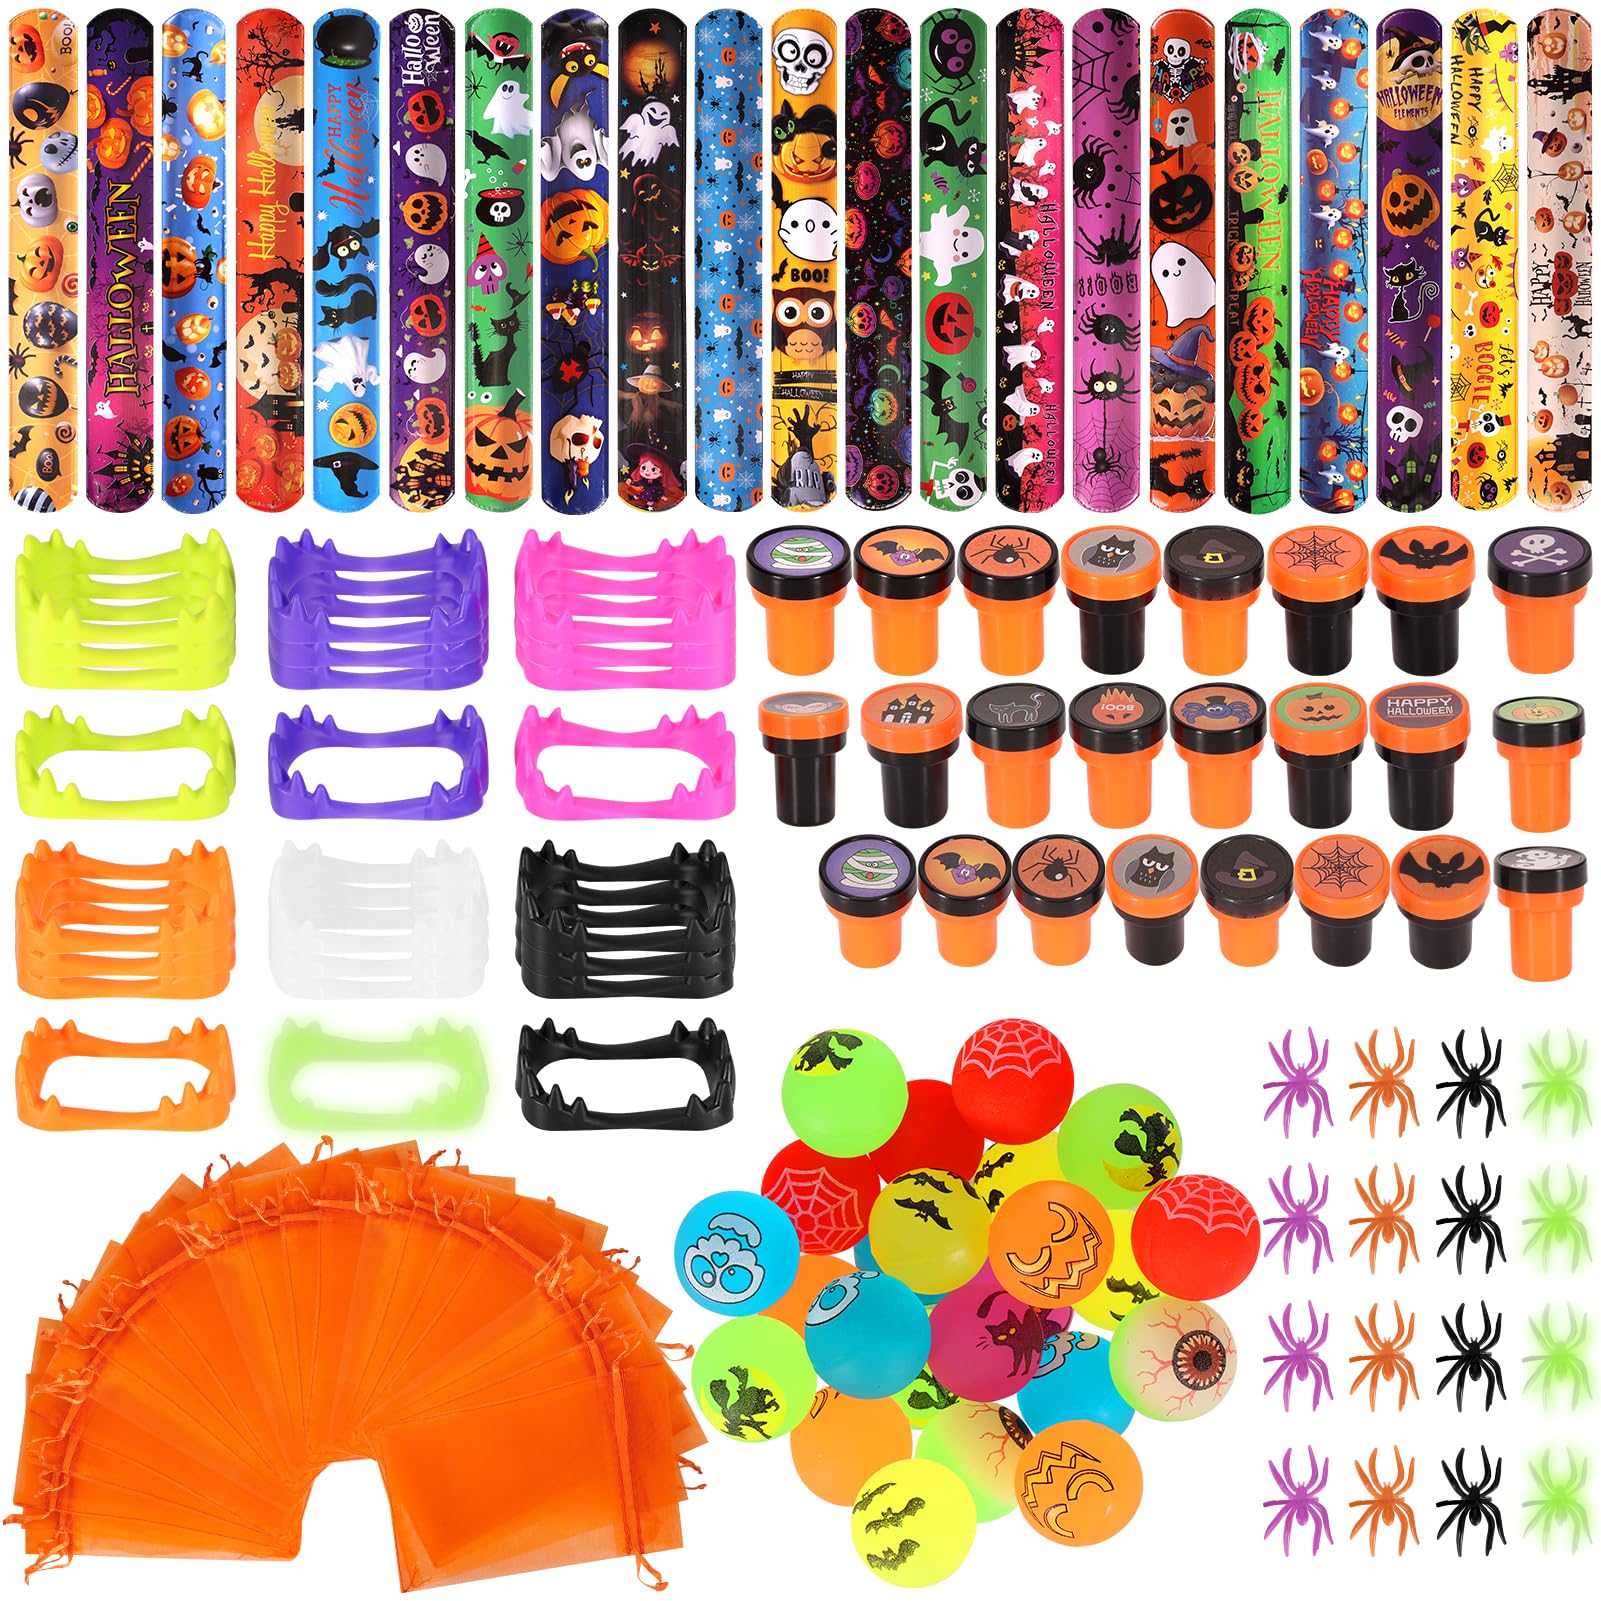 M.best 35pcs Glow Bracelets Glow in The Dark Party Supplies Bracelets Toys  for Kids Birthday Halloween Christmas Party Favors